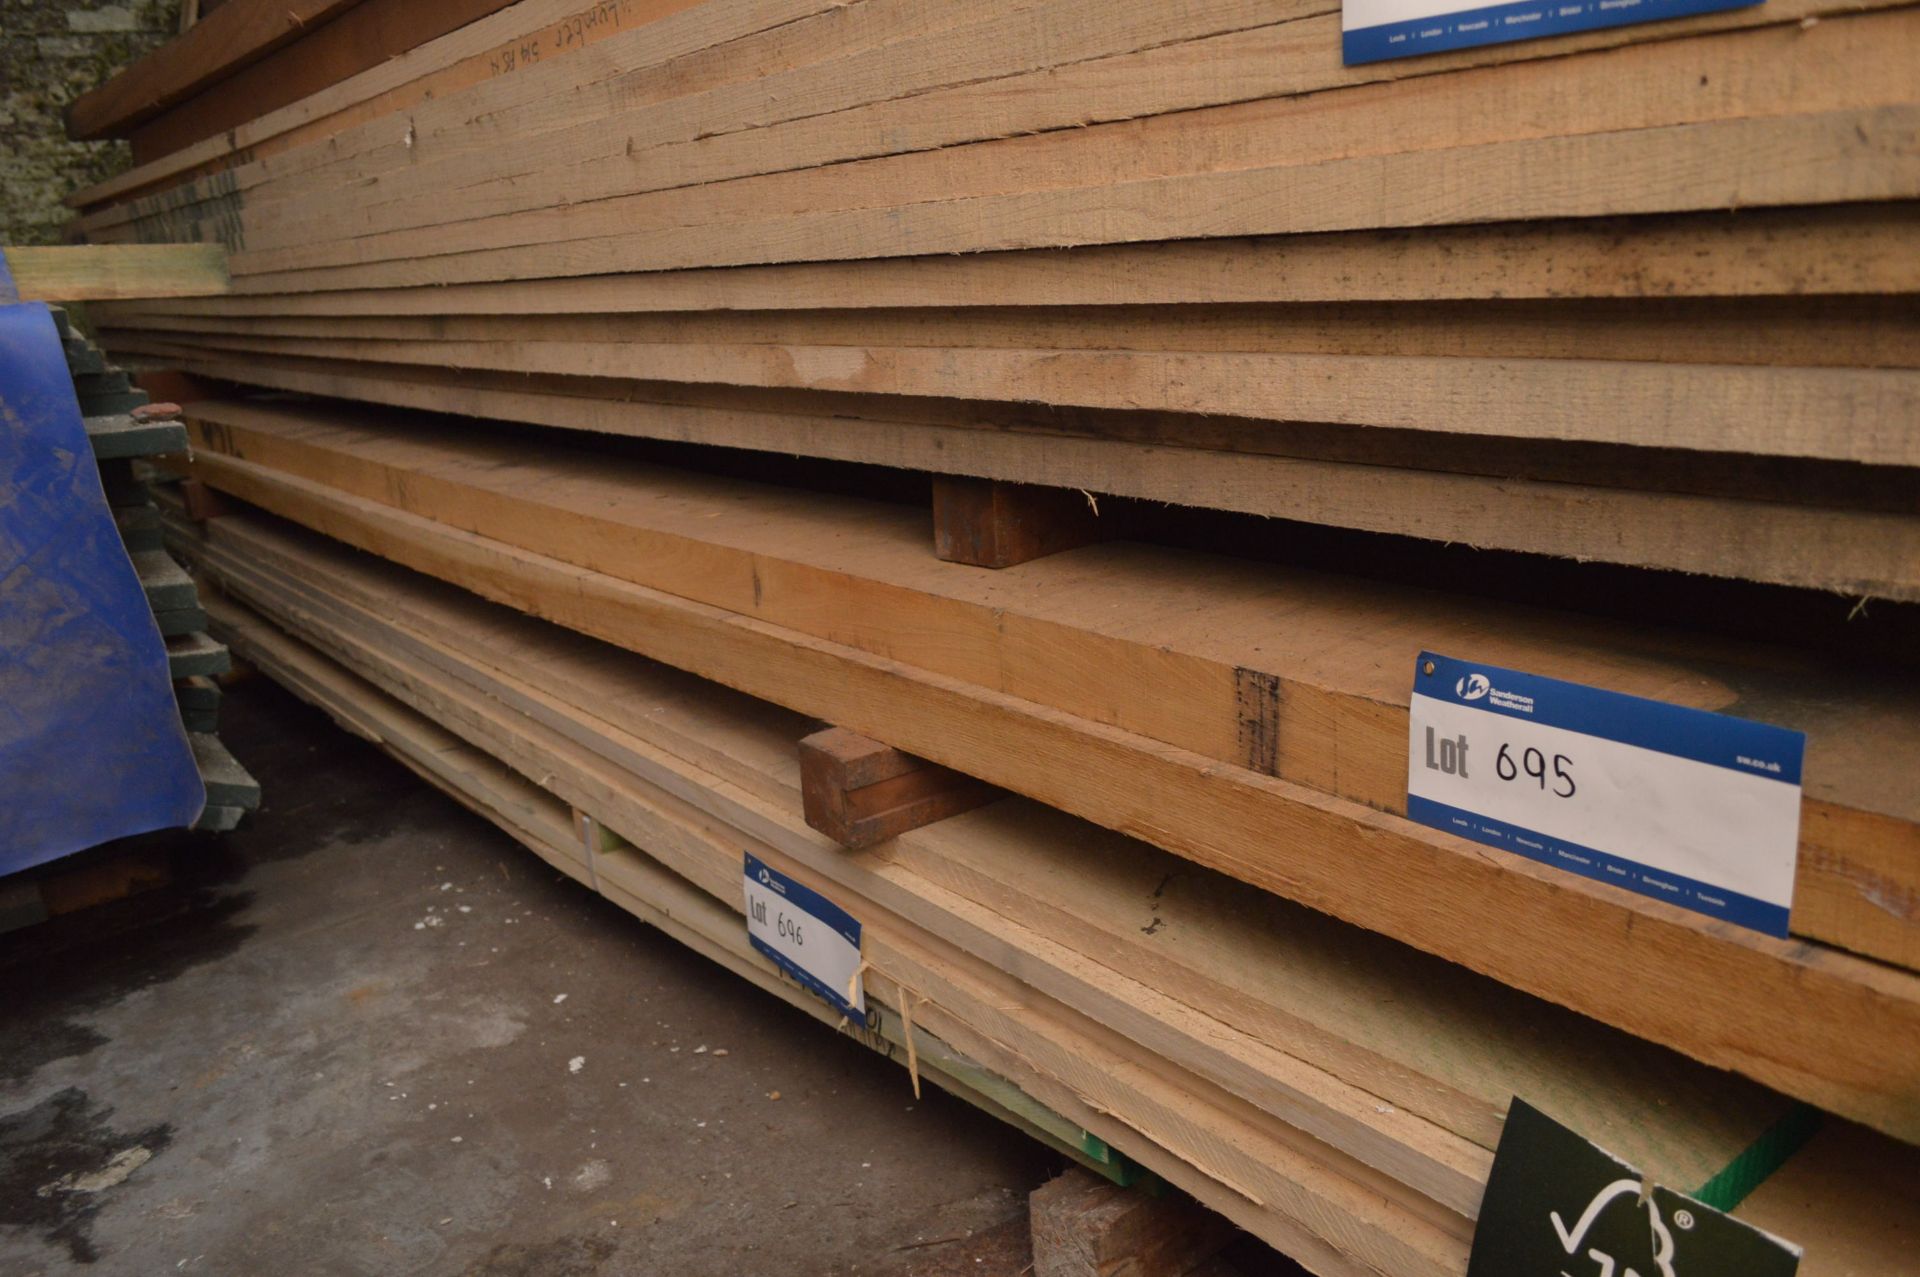 Rough Sawn Timber (understood to be oak), (top bundle of stack), each length up to approx. 16ft long